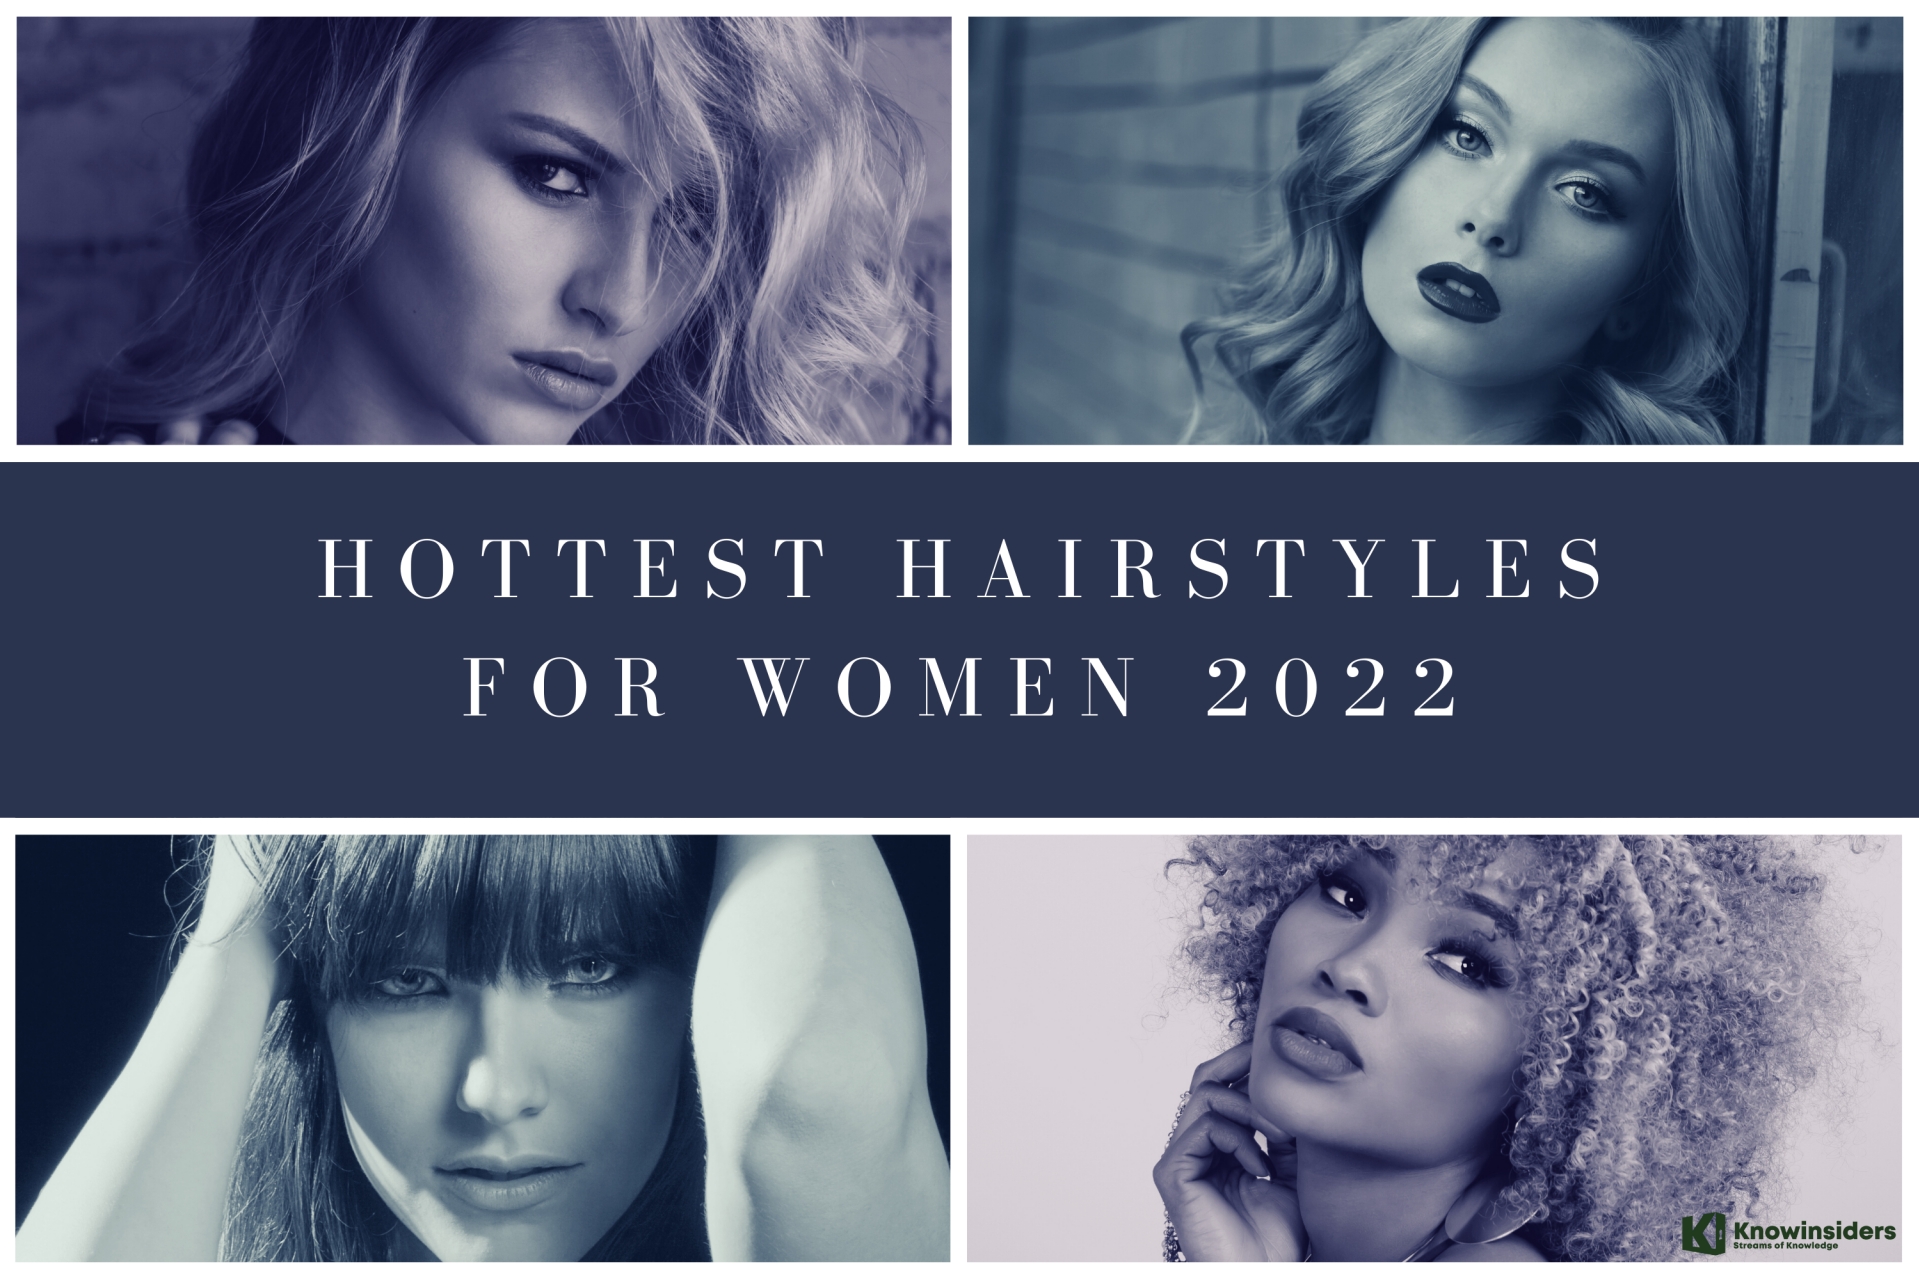 10 Hottest Hairstyles For Women In 2022 for You to Try